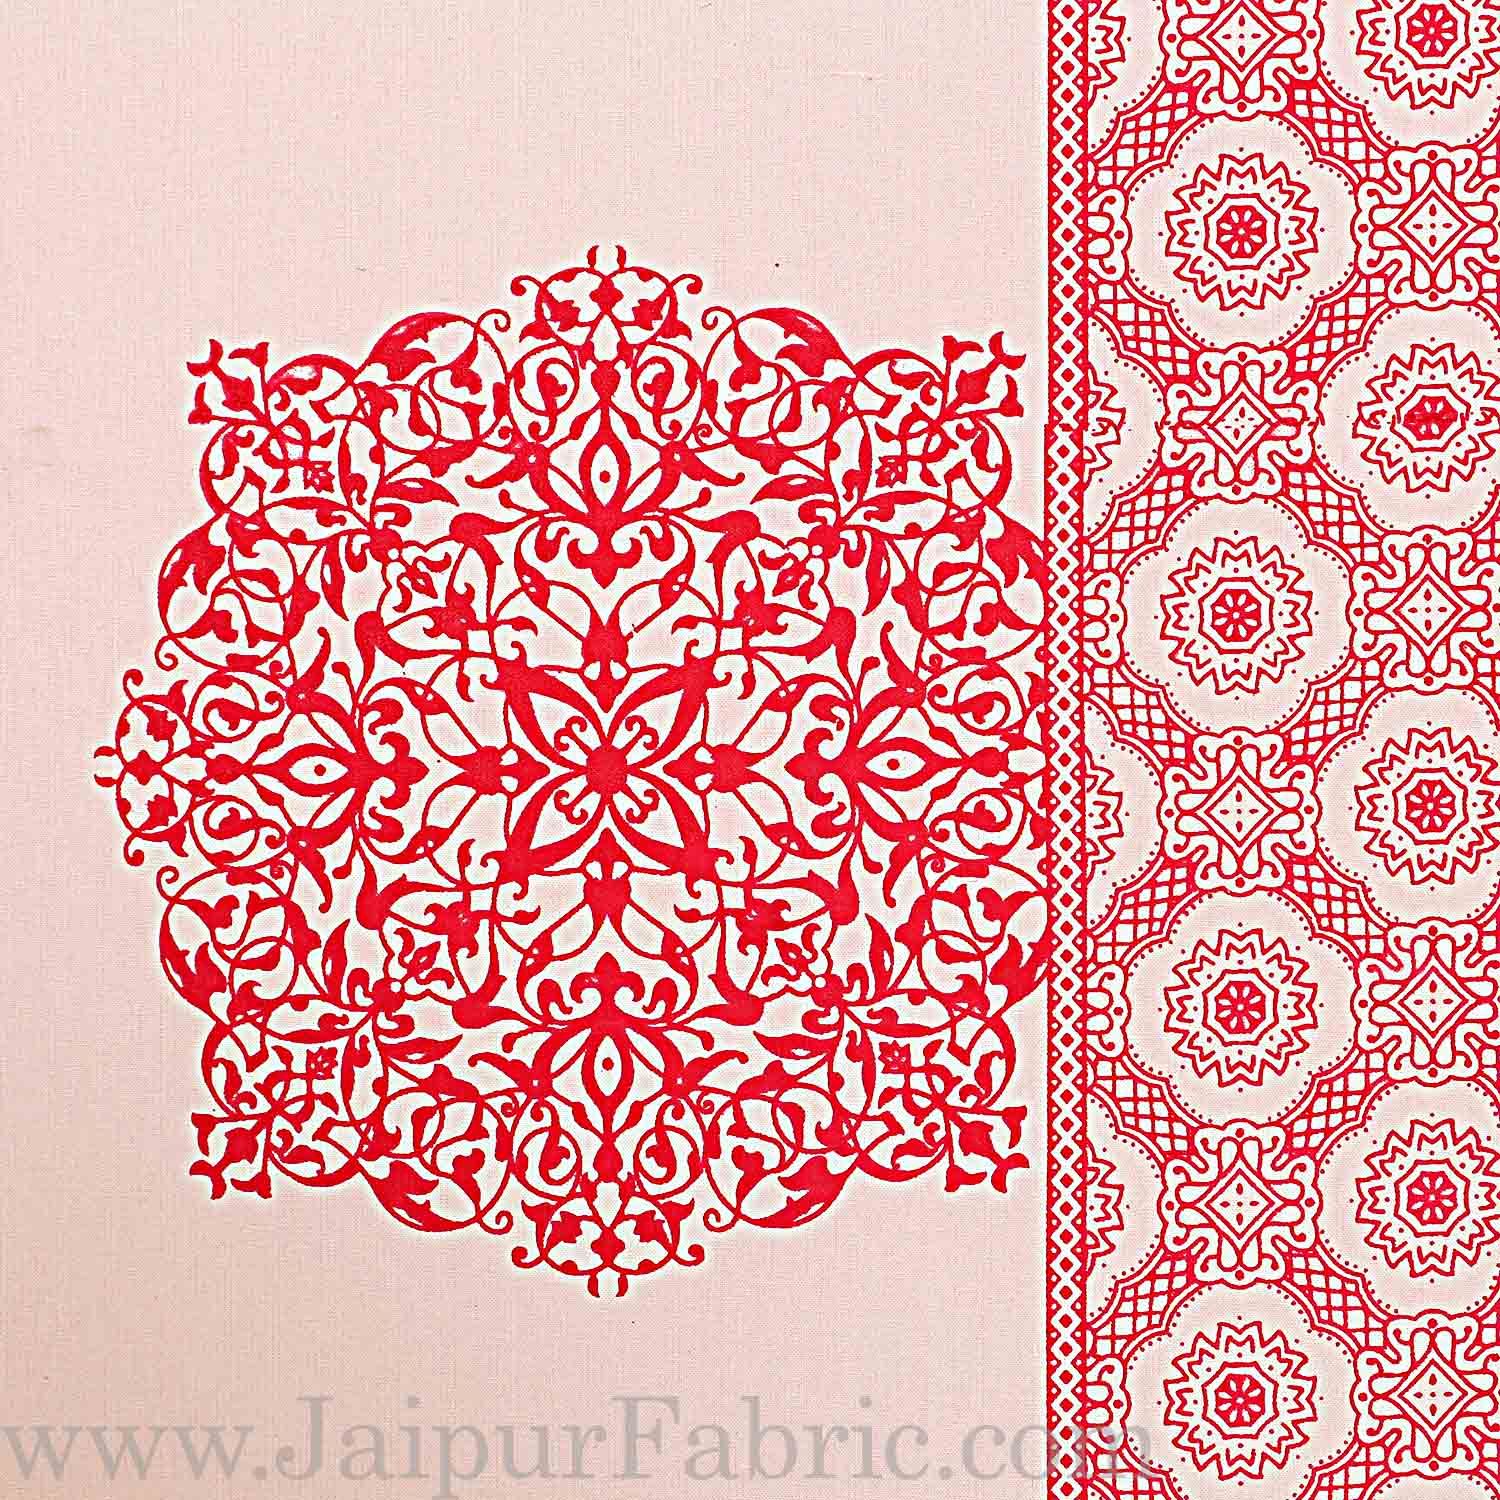 Light Red Border With big Boota Super fine cotton Double bedsheet